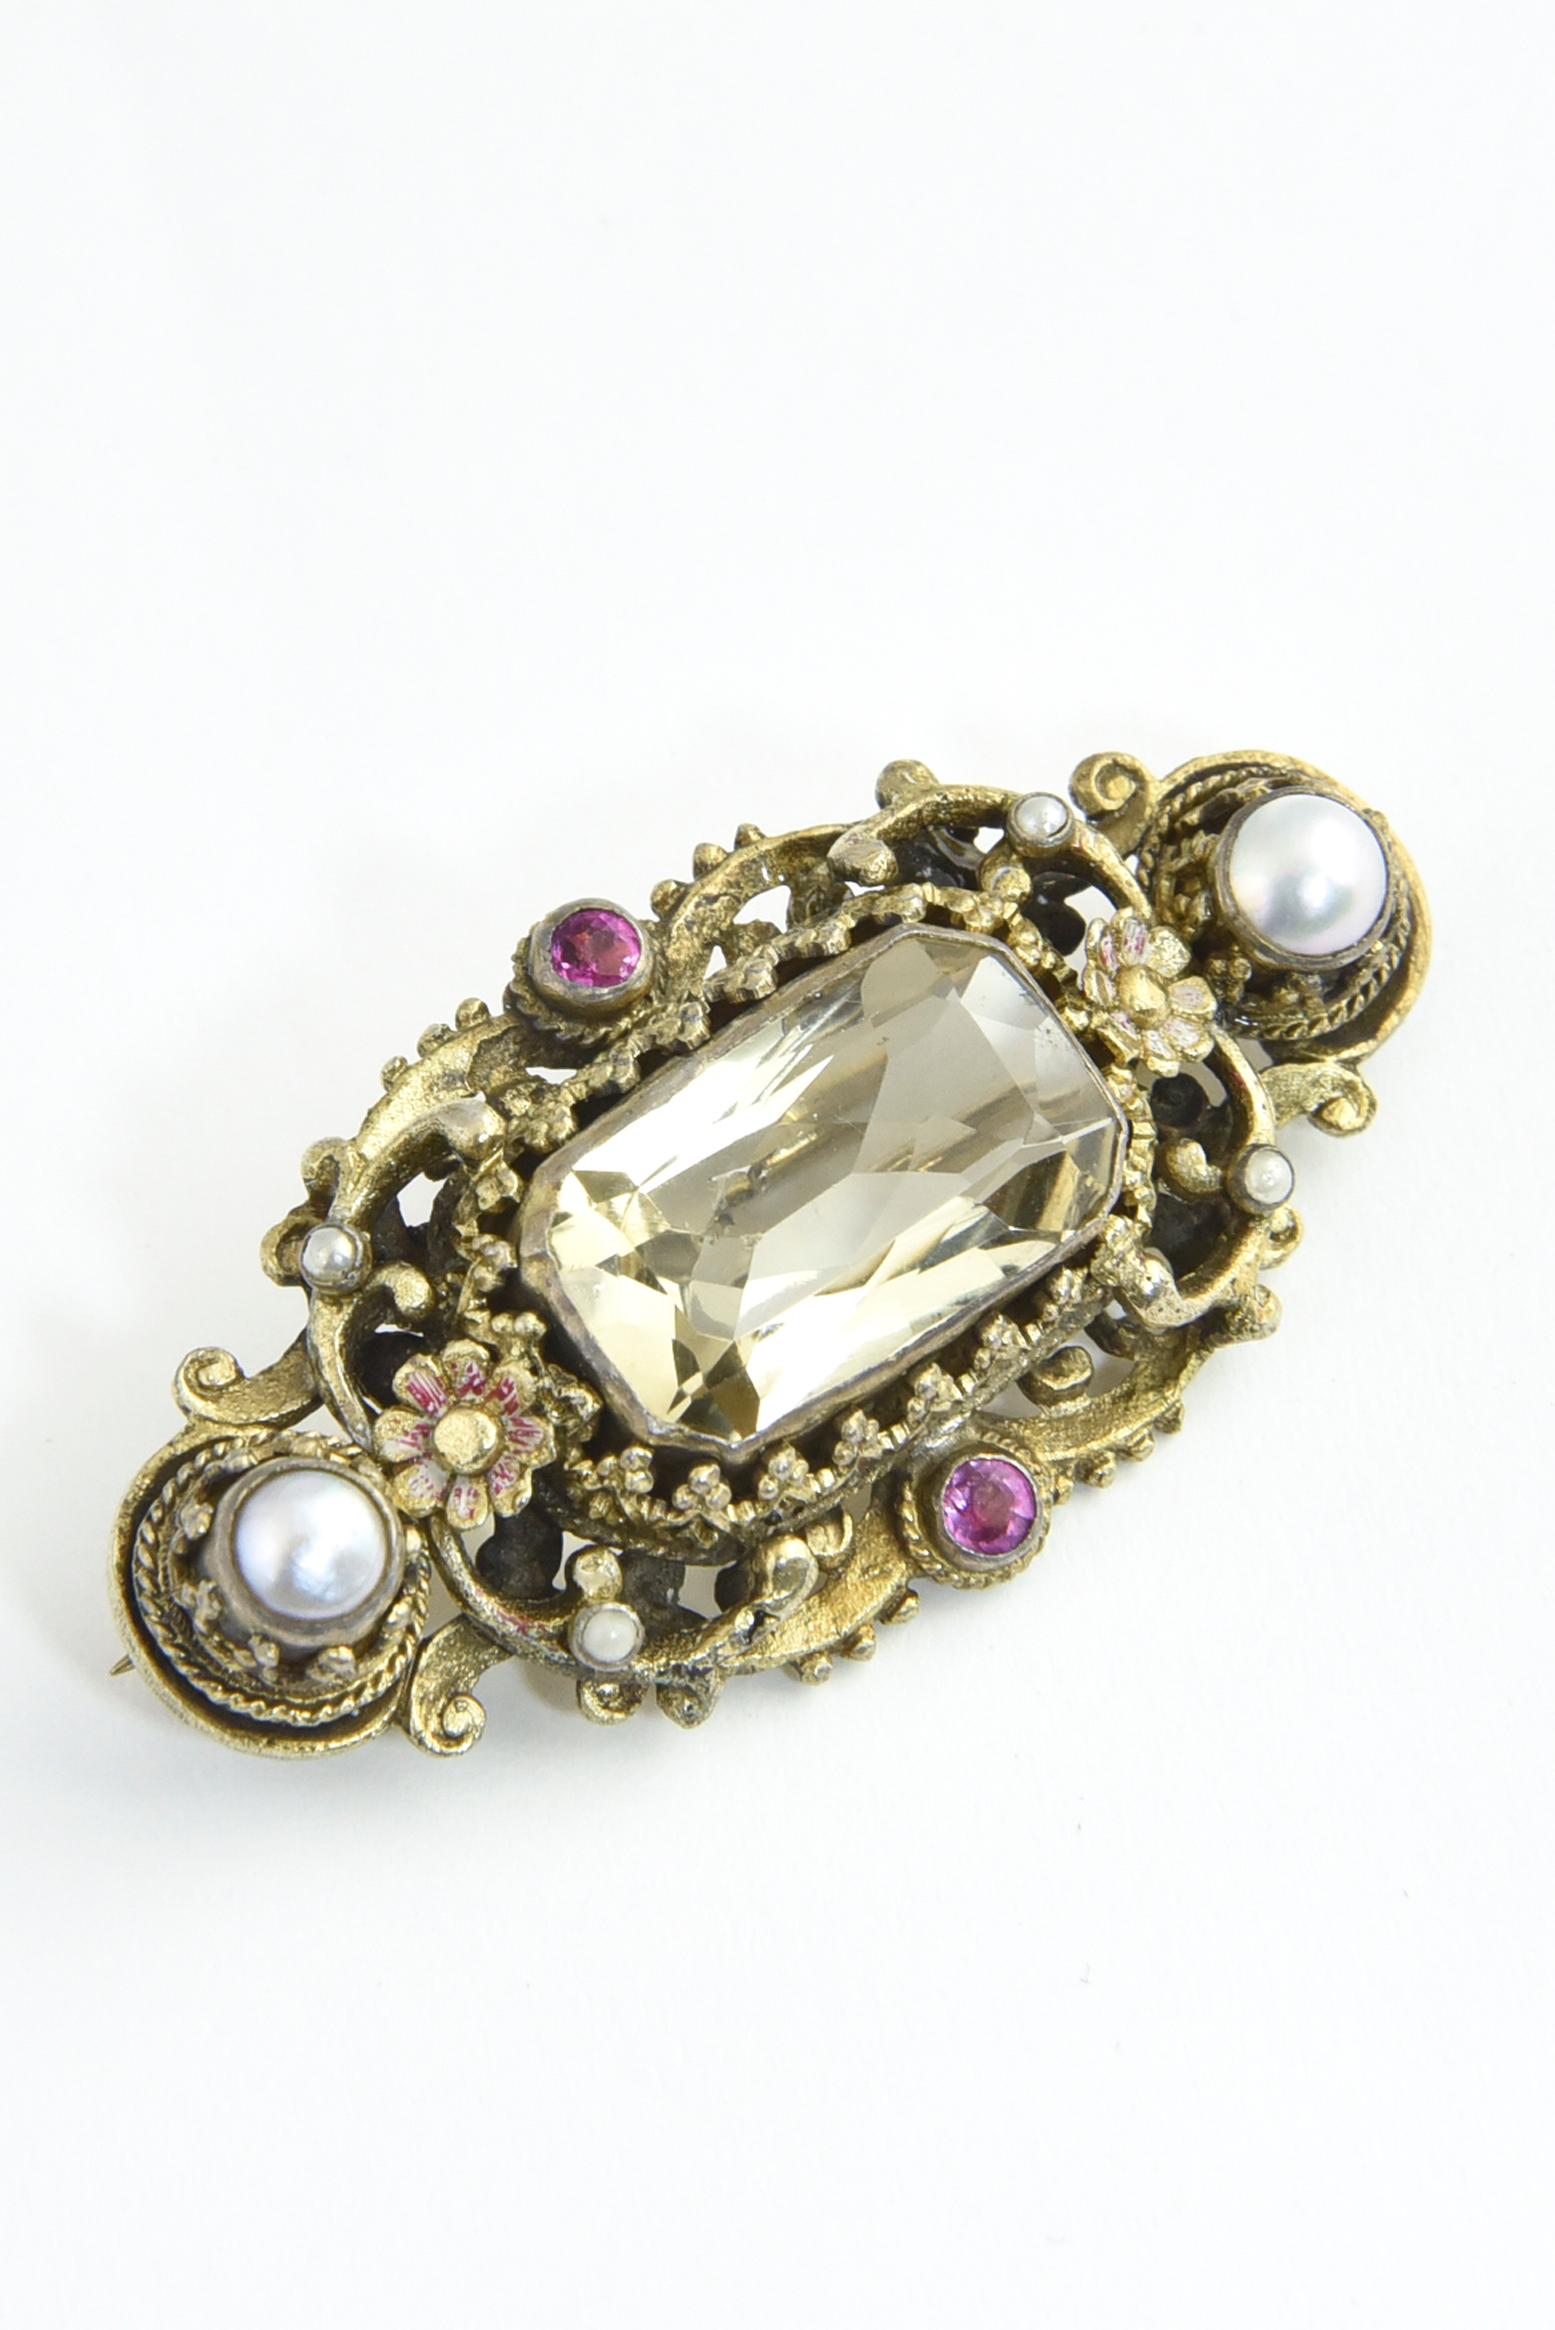 Antique Austro-Hungarian Floral Gilt Silver Citrine Brooch For Sale 2